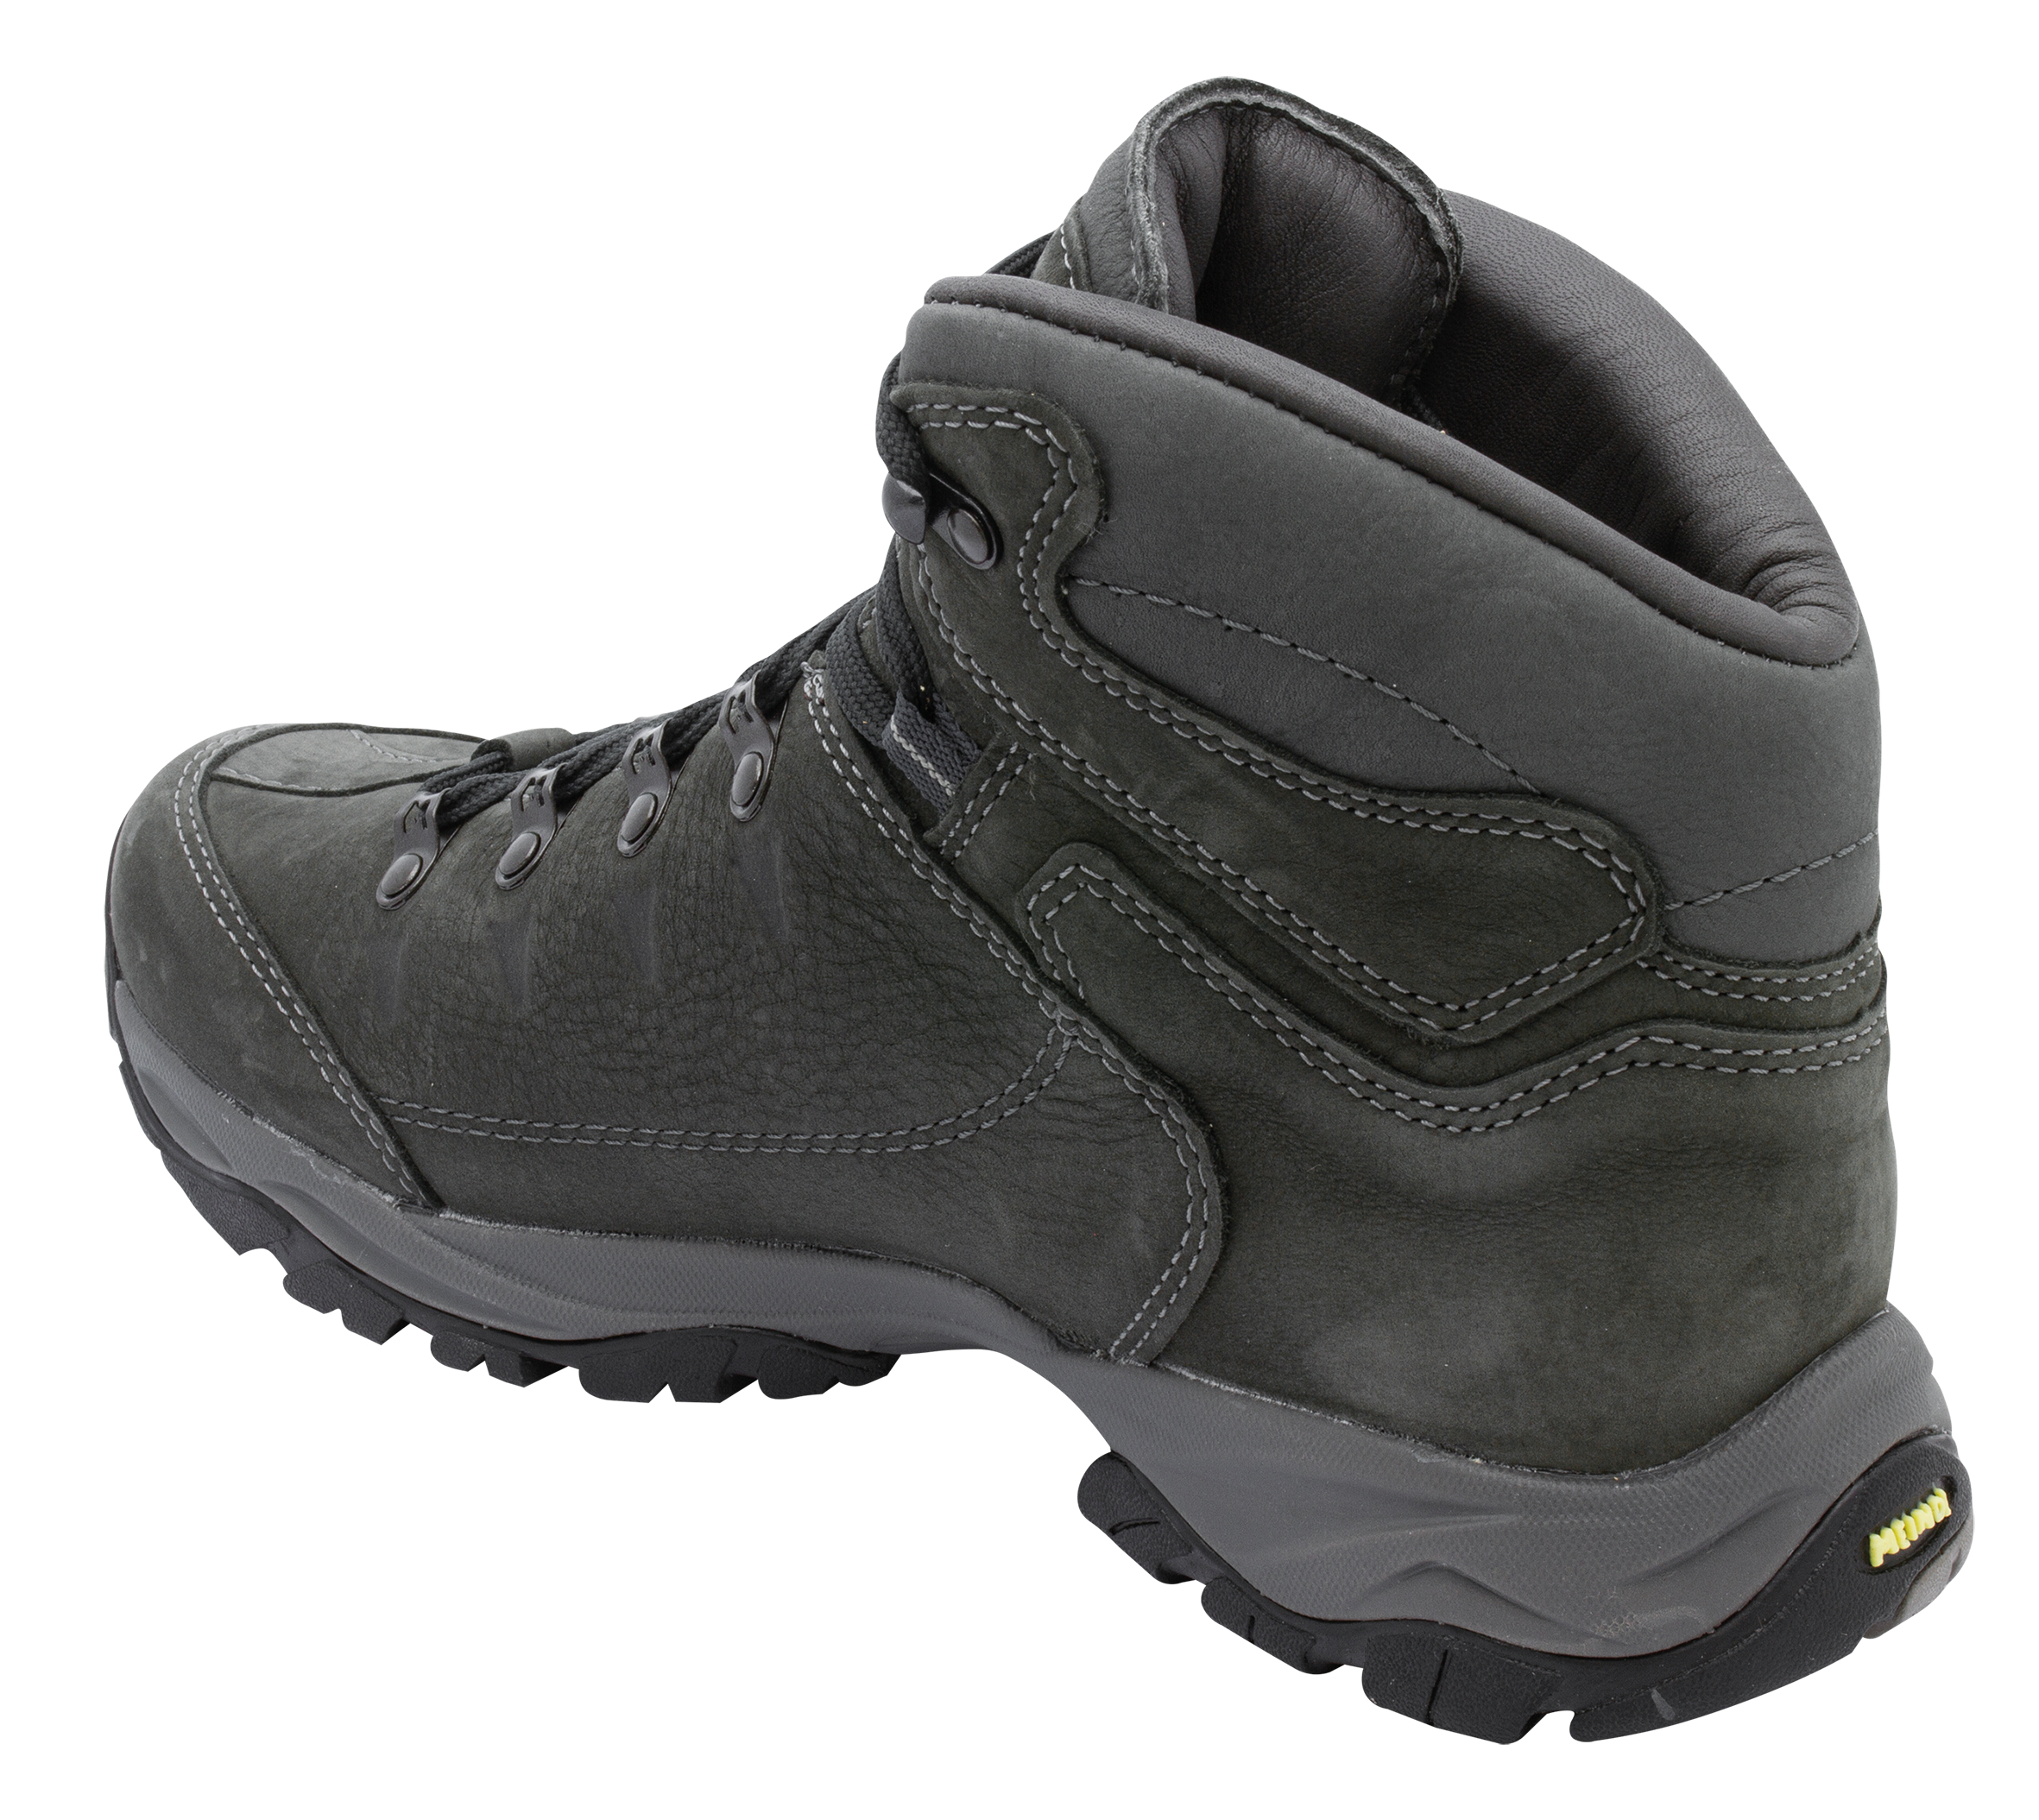 Meindl Ohio 2 GTX hiking boots anthracite | Recon Company